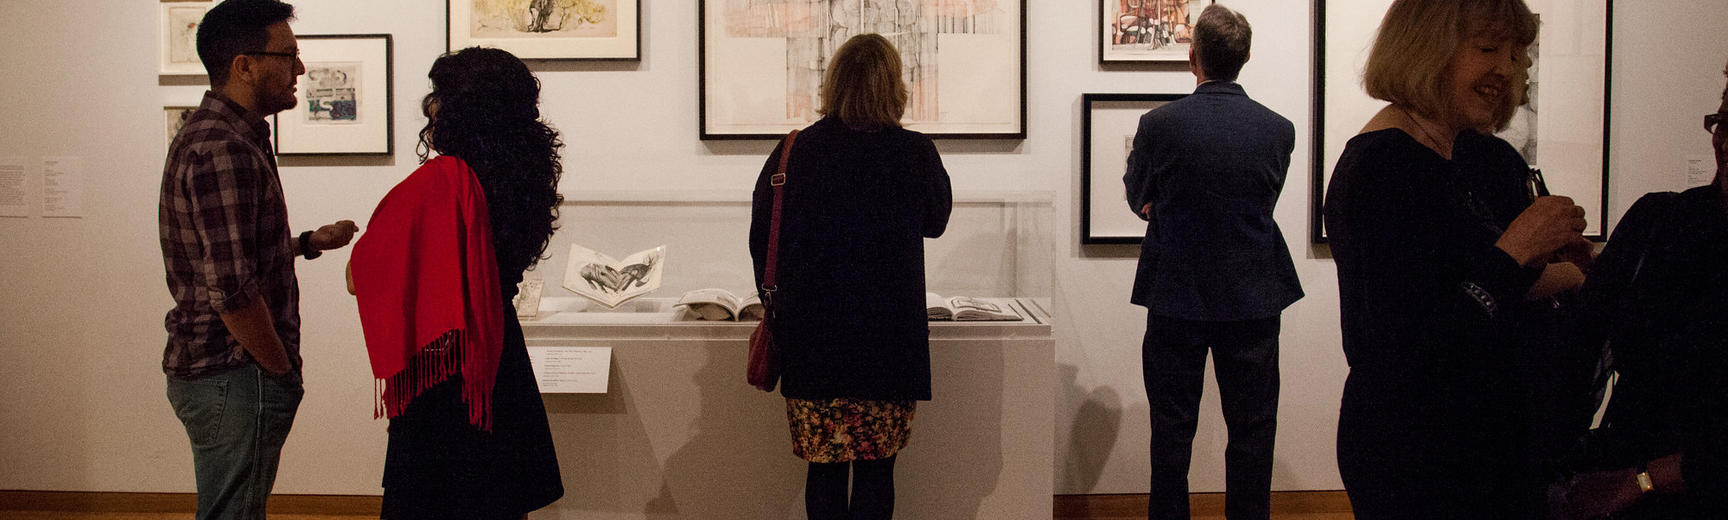 An image of a visitors looking at artwork in a museum gallery